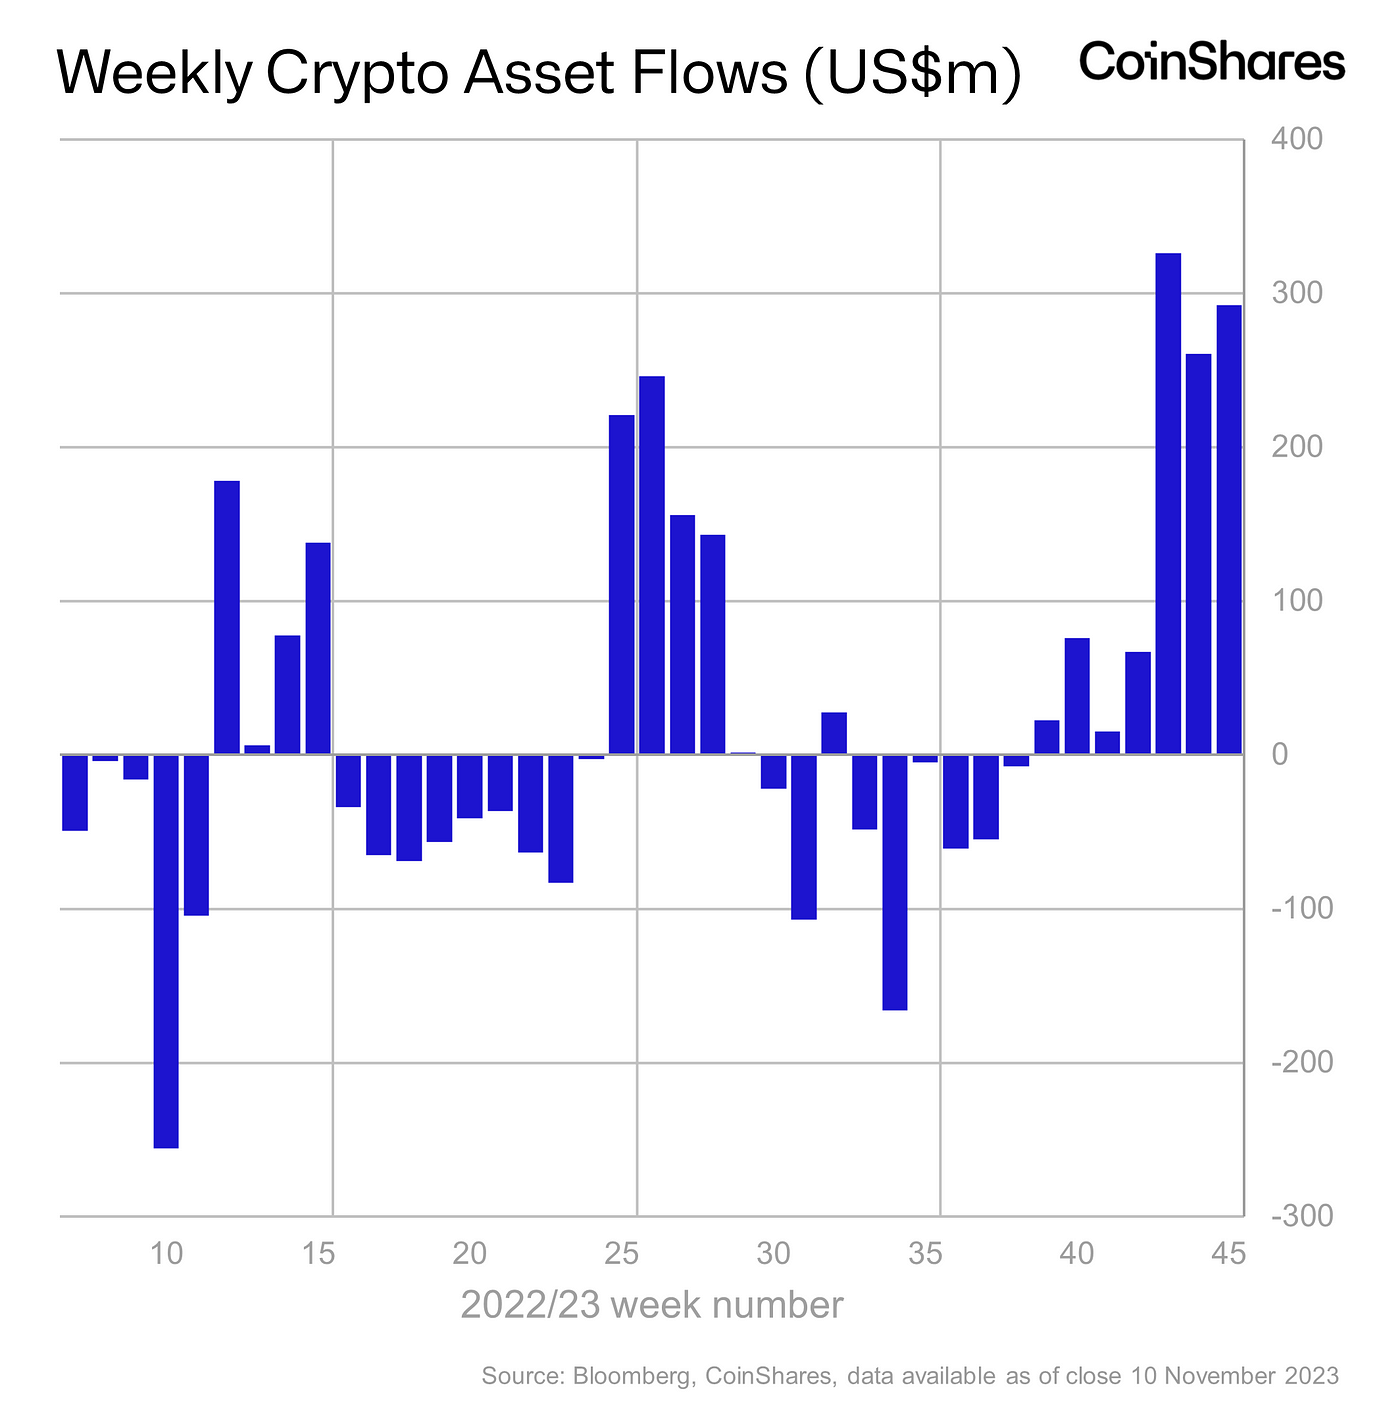 CoinShares weekly crypto asset flows chart